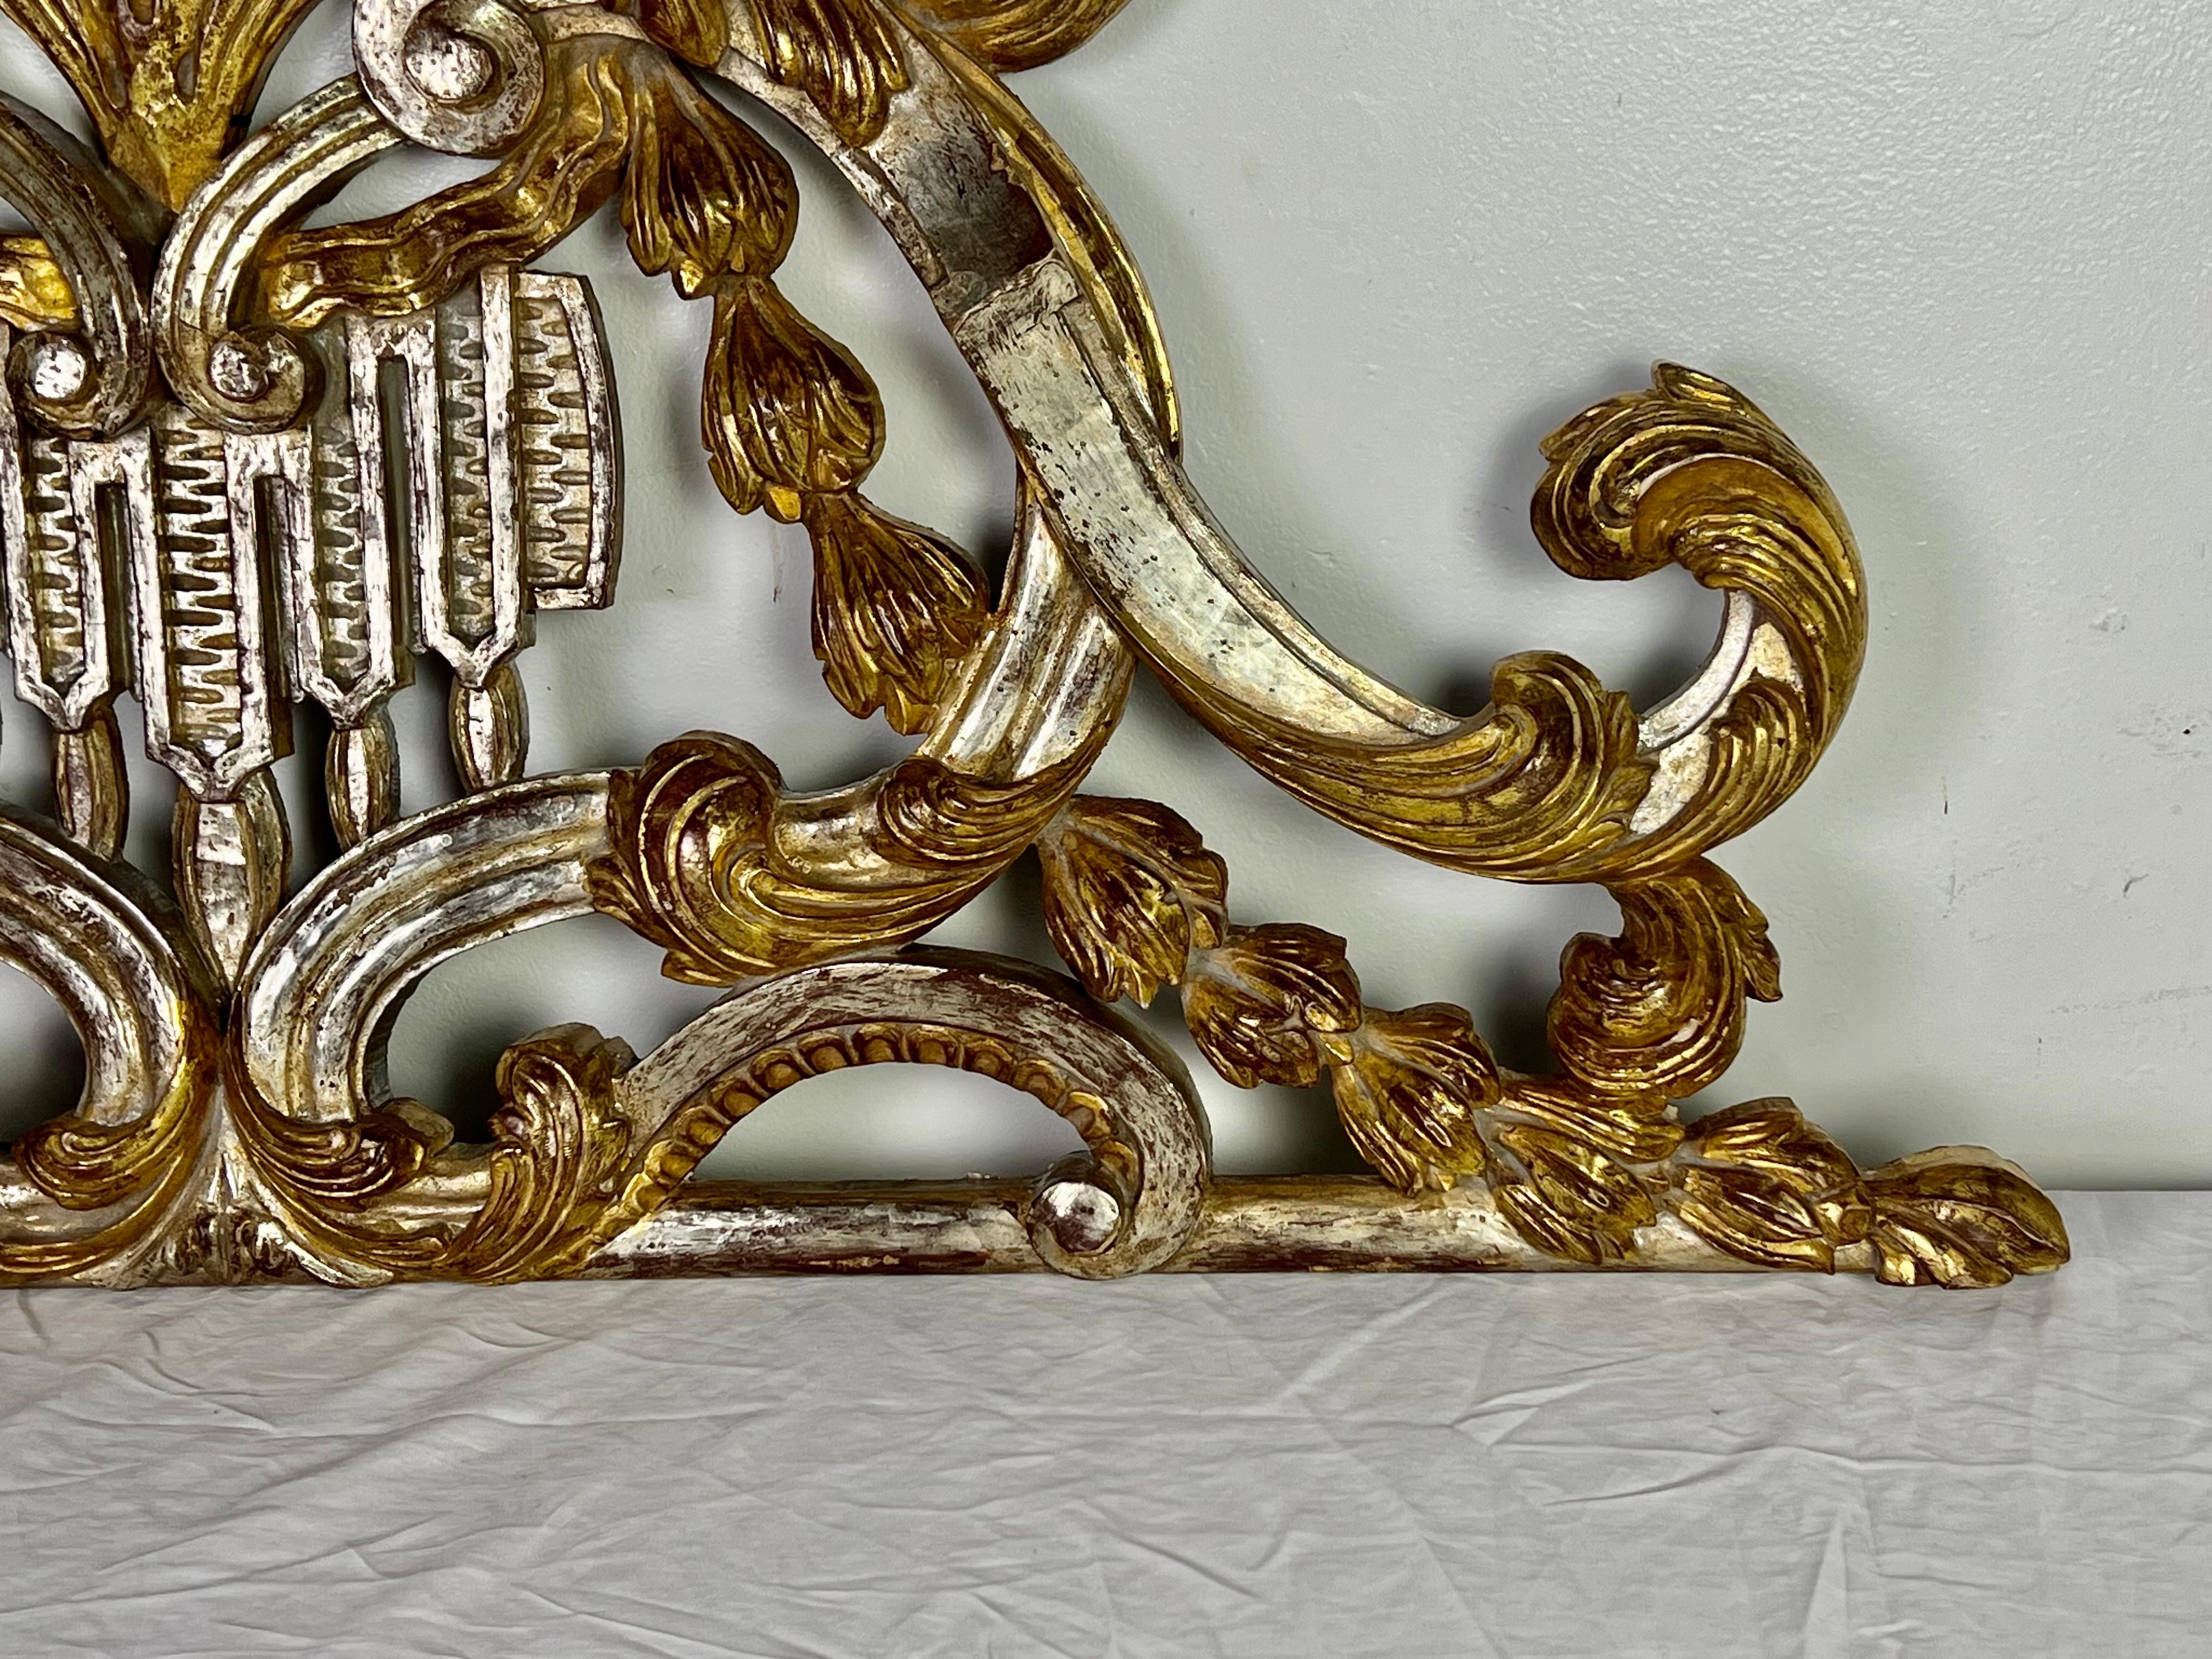 Italian Silver and Gold Giltwood Carving w/ Scrolls and Acanthus Leaves C. 1900